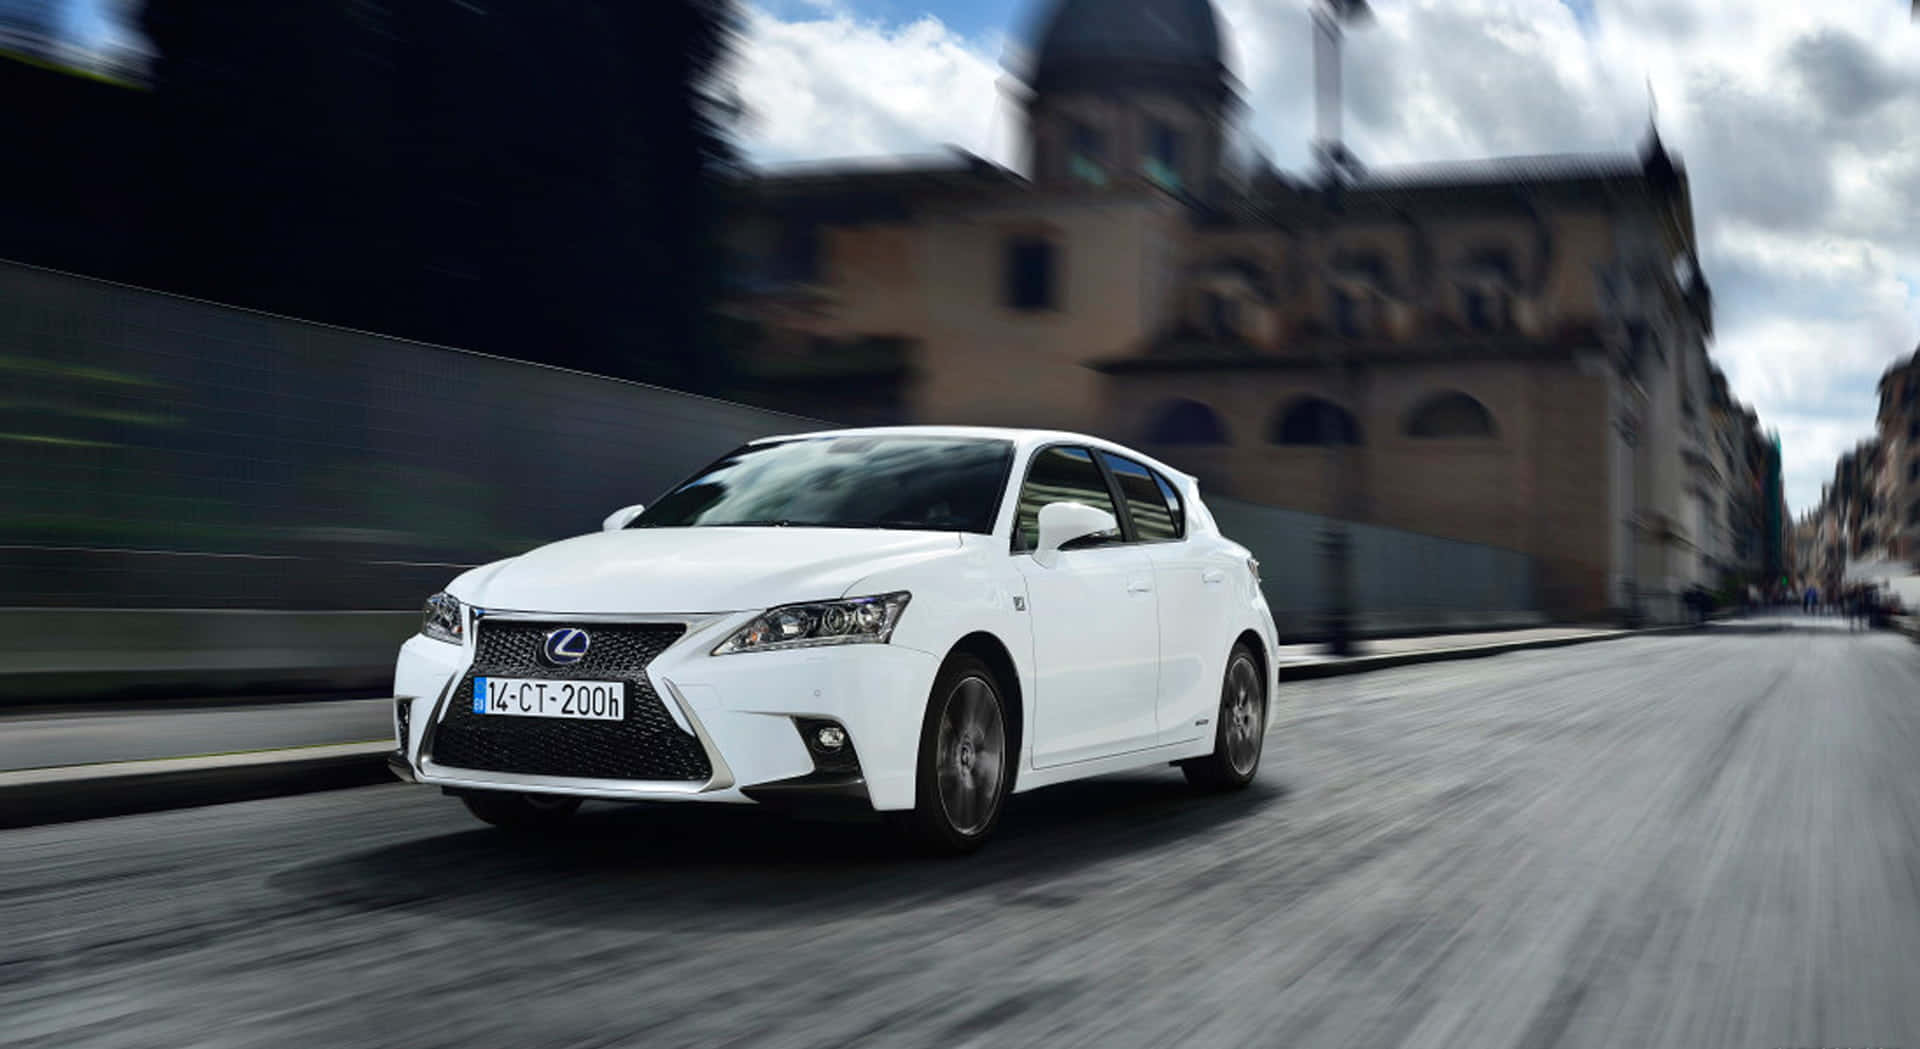 Sleek and Stylish Lexus CT 200h in Pristine Showroom Condition Wallpaper